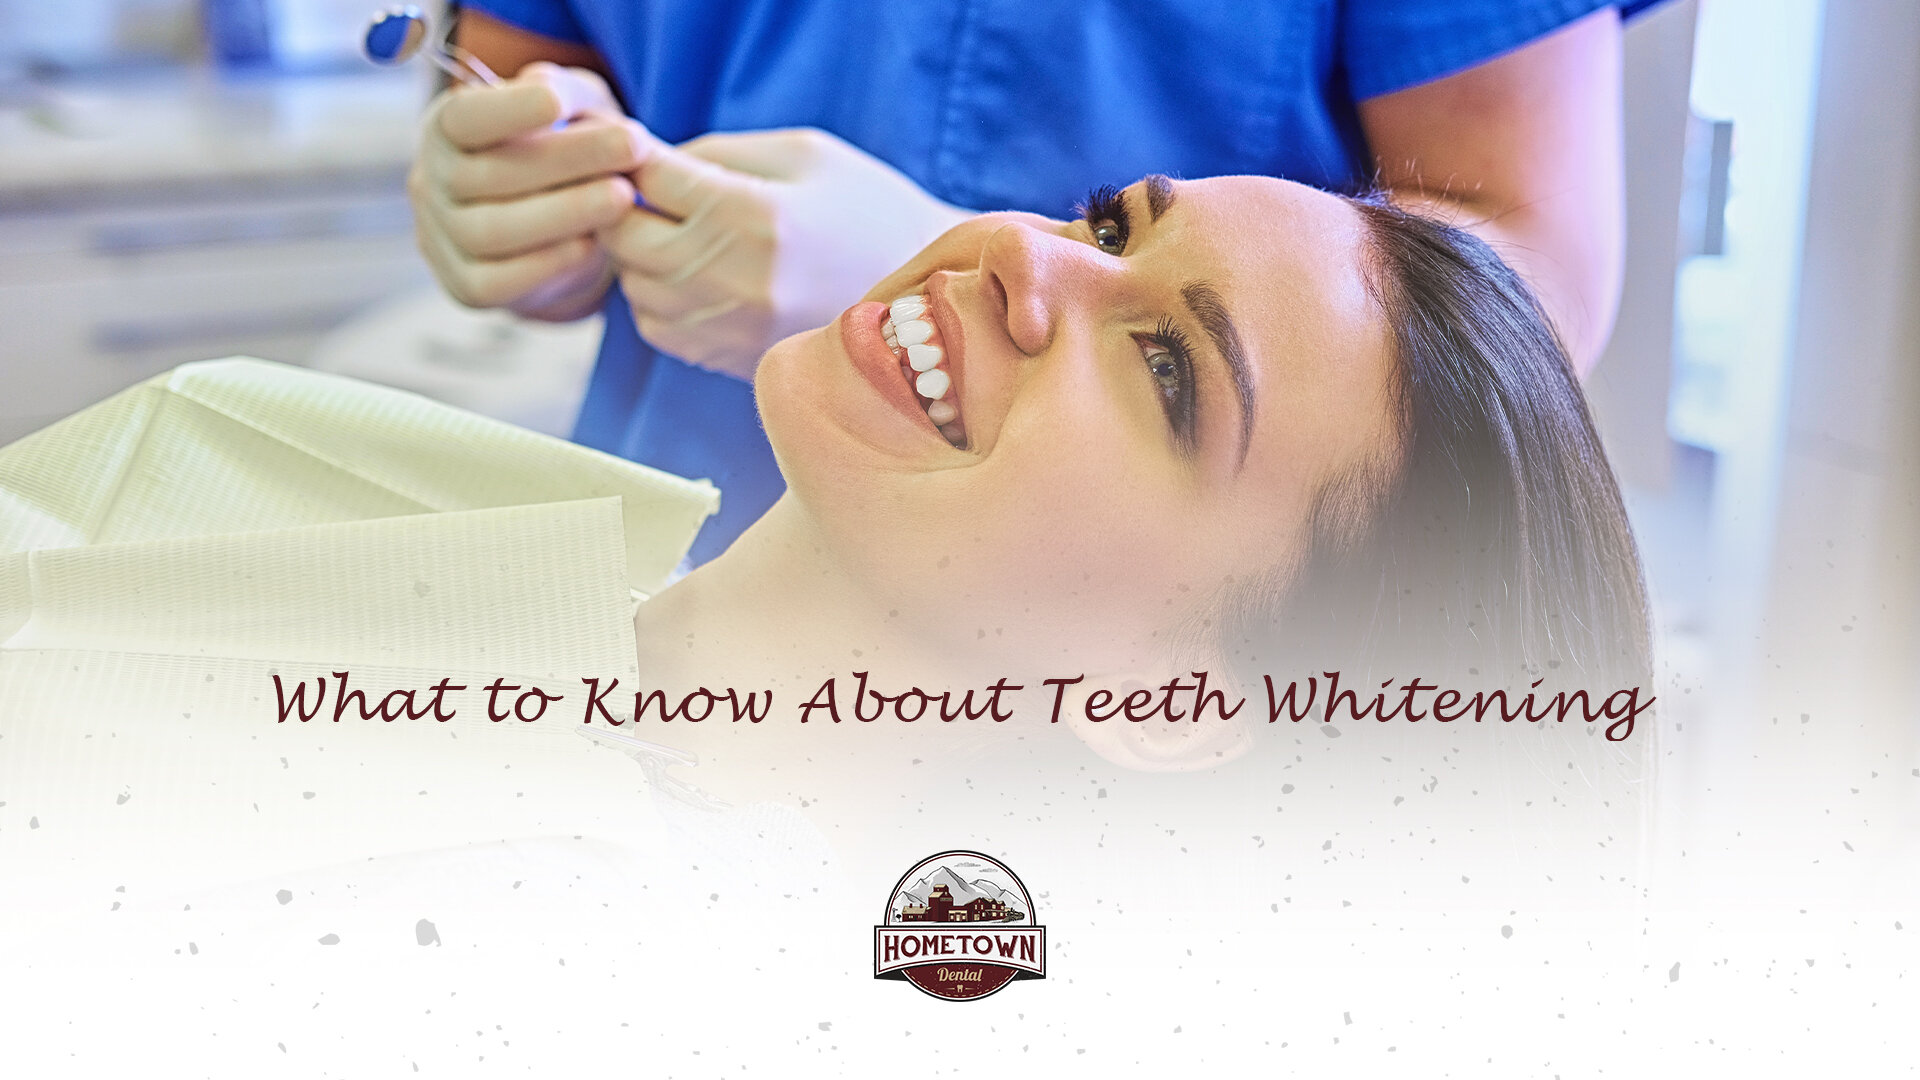 WHAT TO KNOW ABOUT TEETH WHITENING